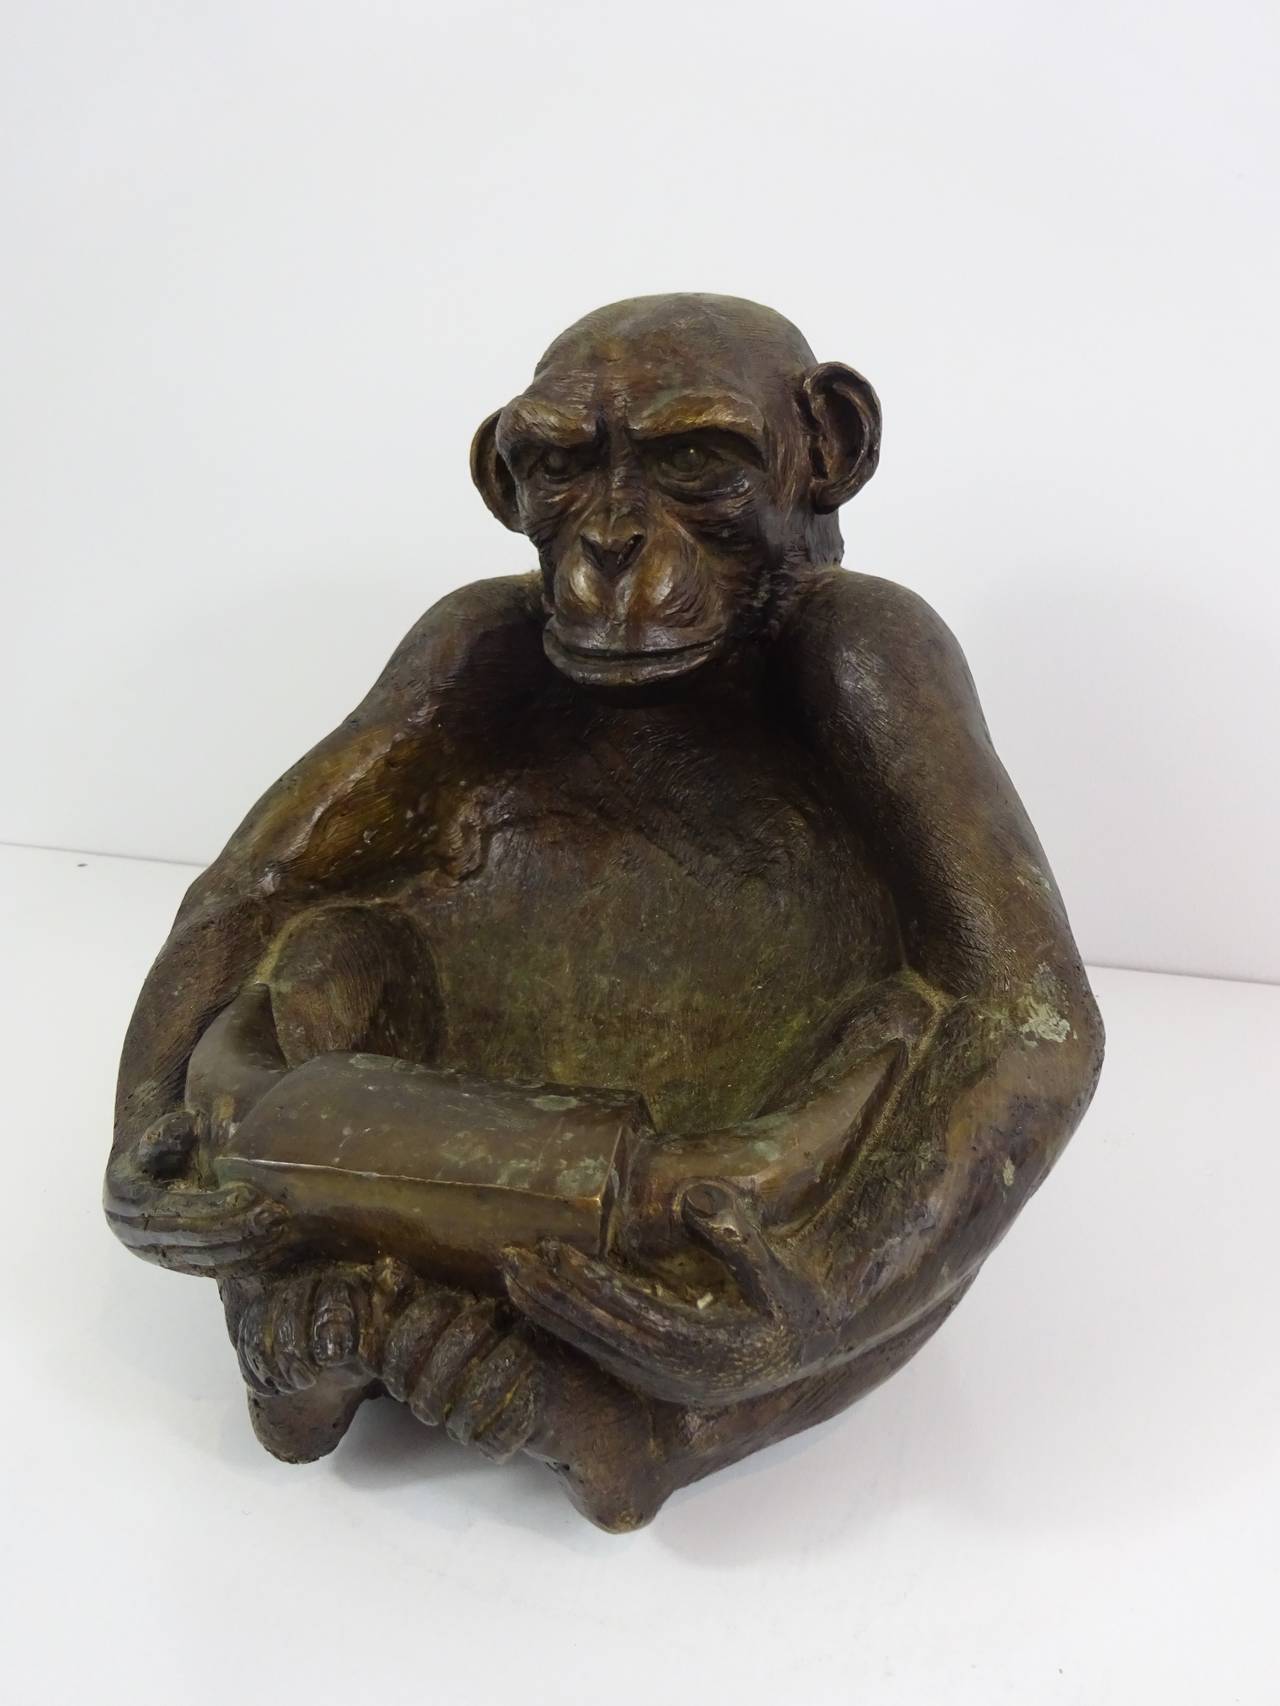 Figural Bronze Monkey Bowl, realisitcally cast and chased